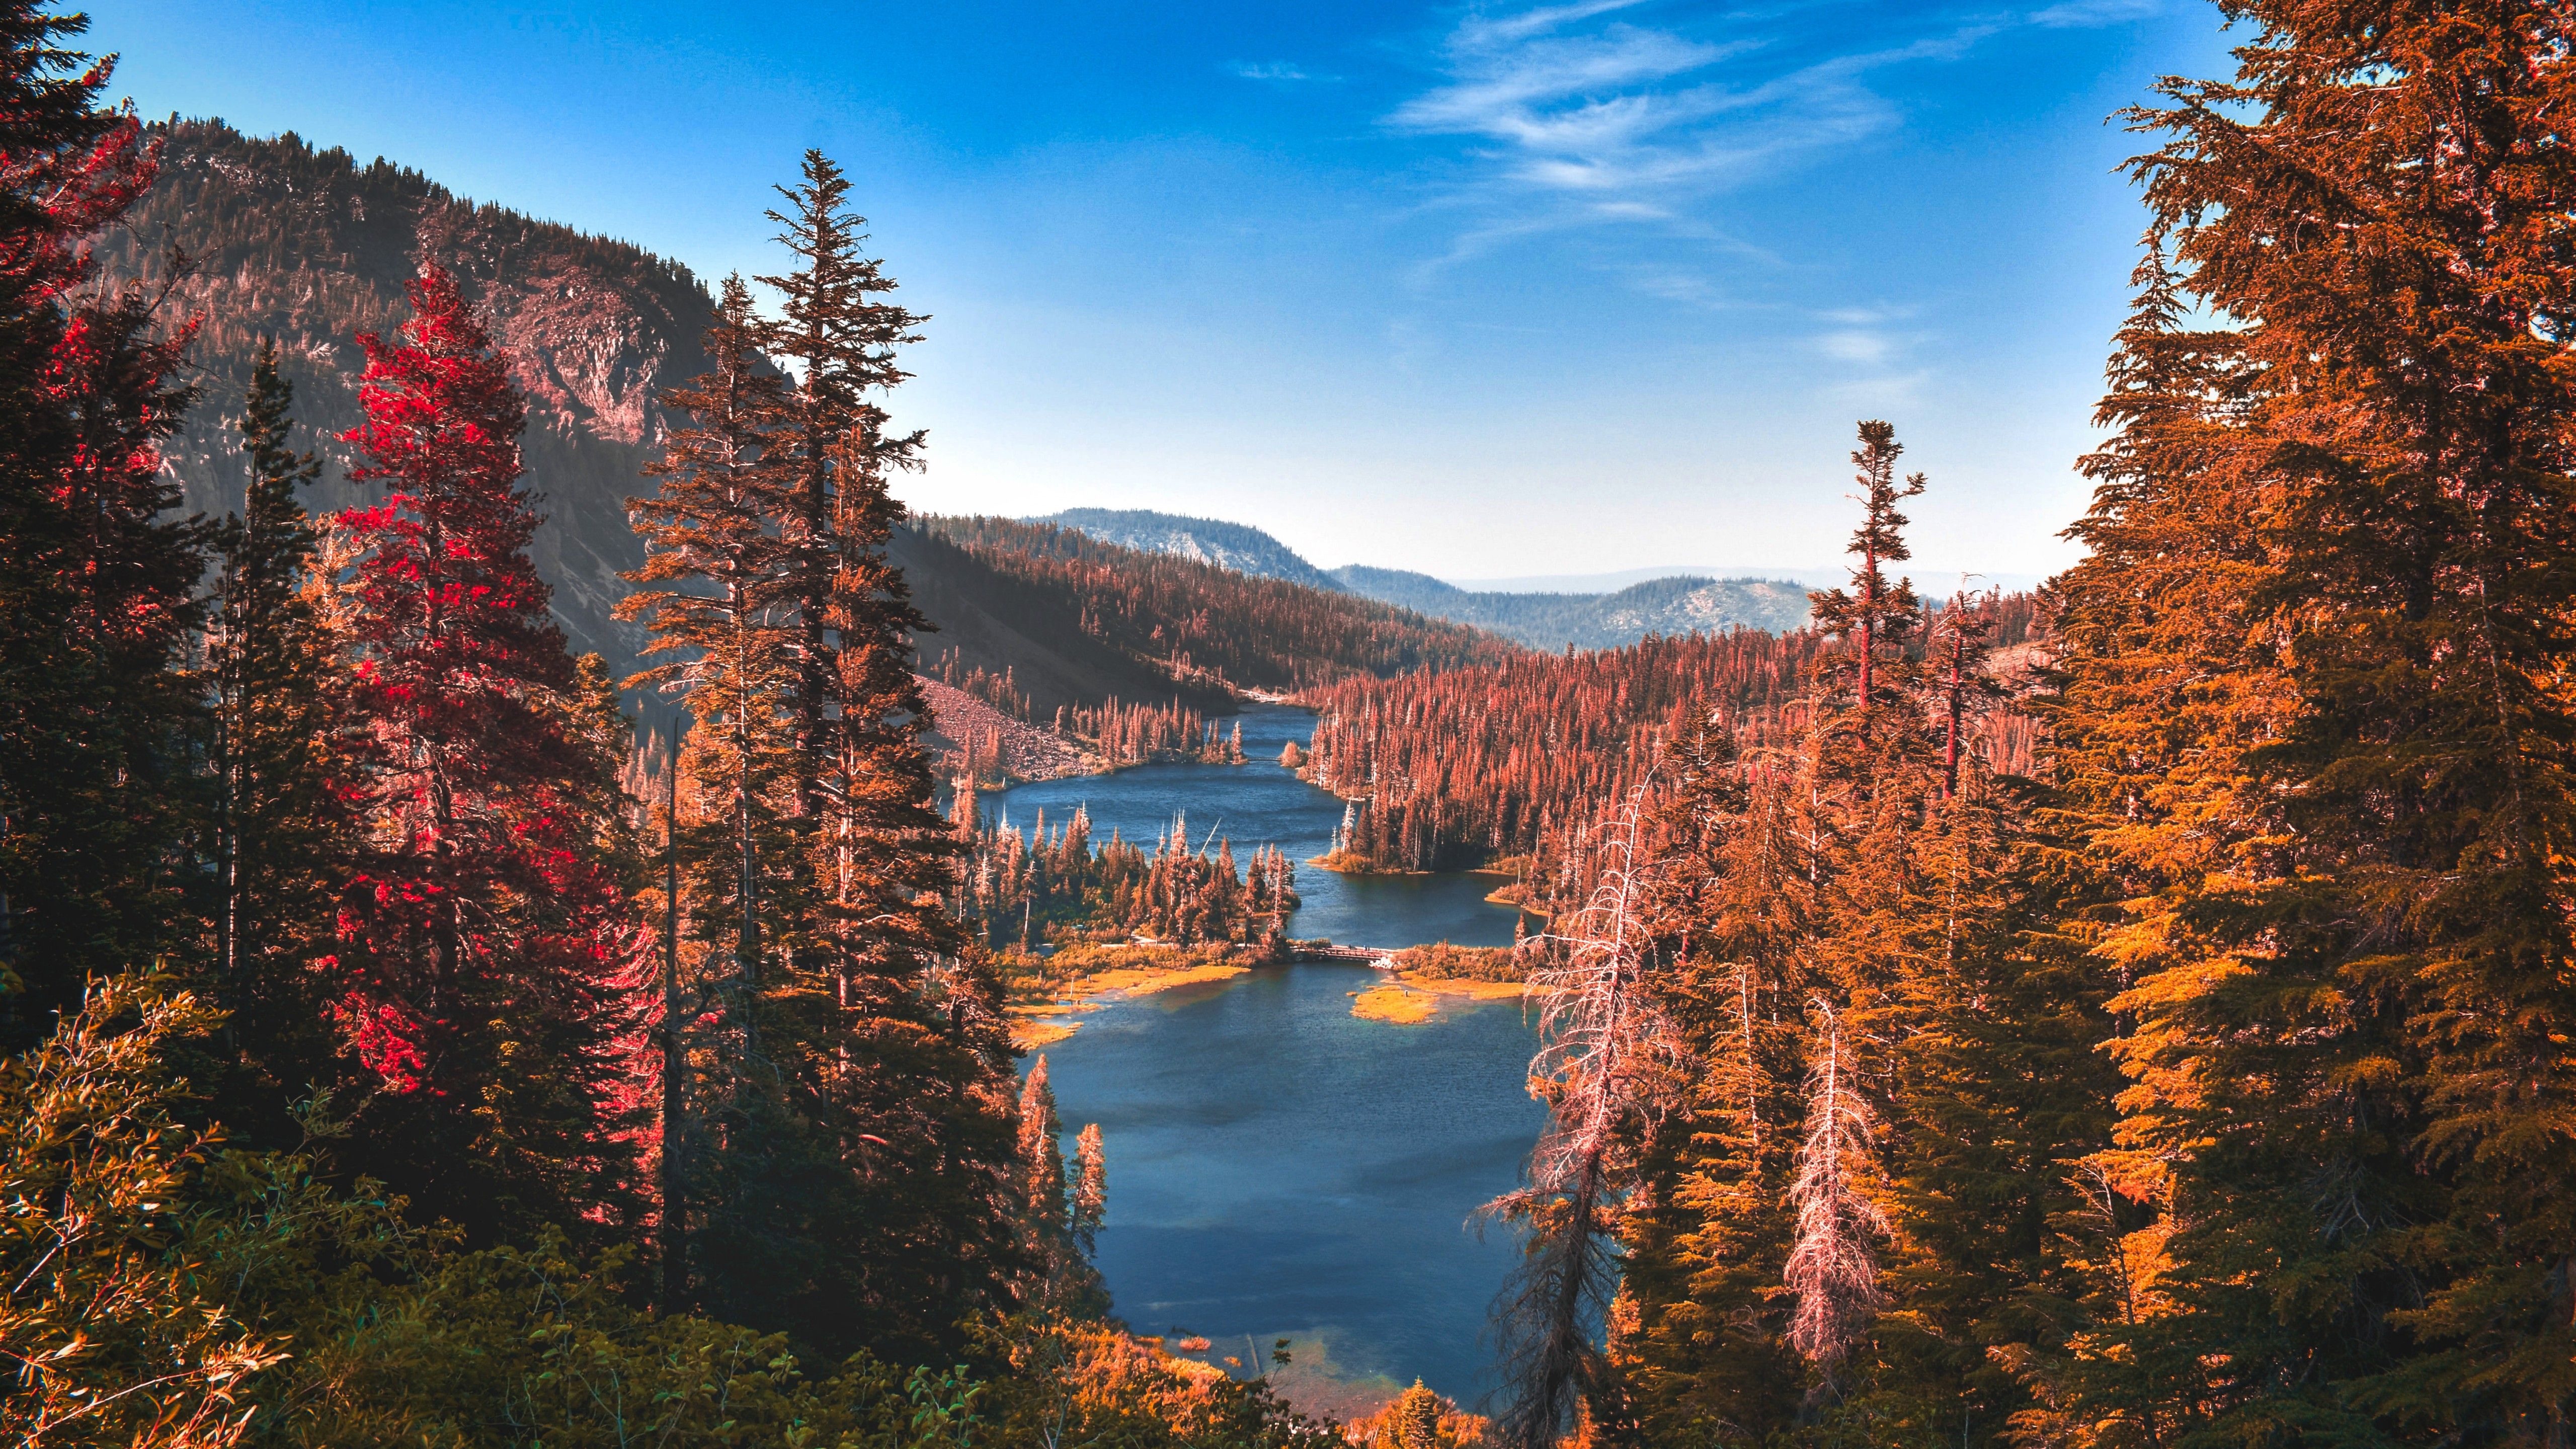 Yosemite National Park 4K Wallpaper, River, Forest, Autumn, Scenery, Landscape, Trees, Valley, Nature